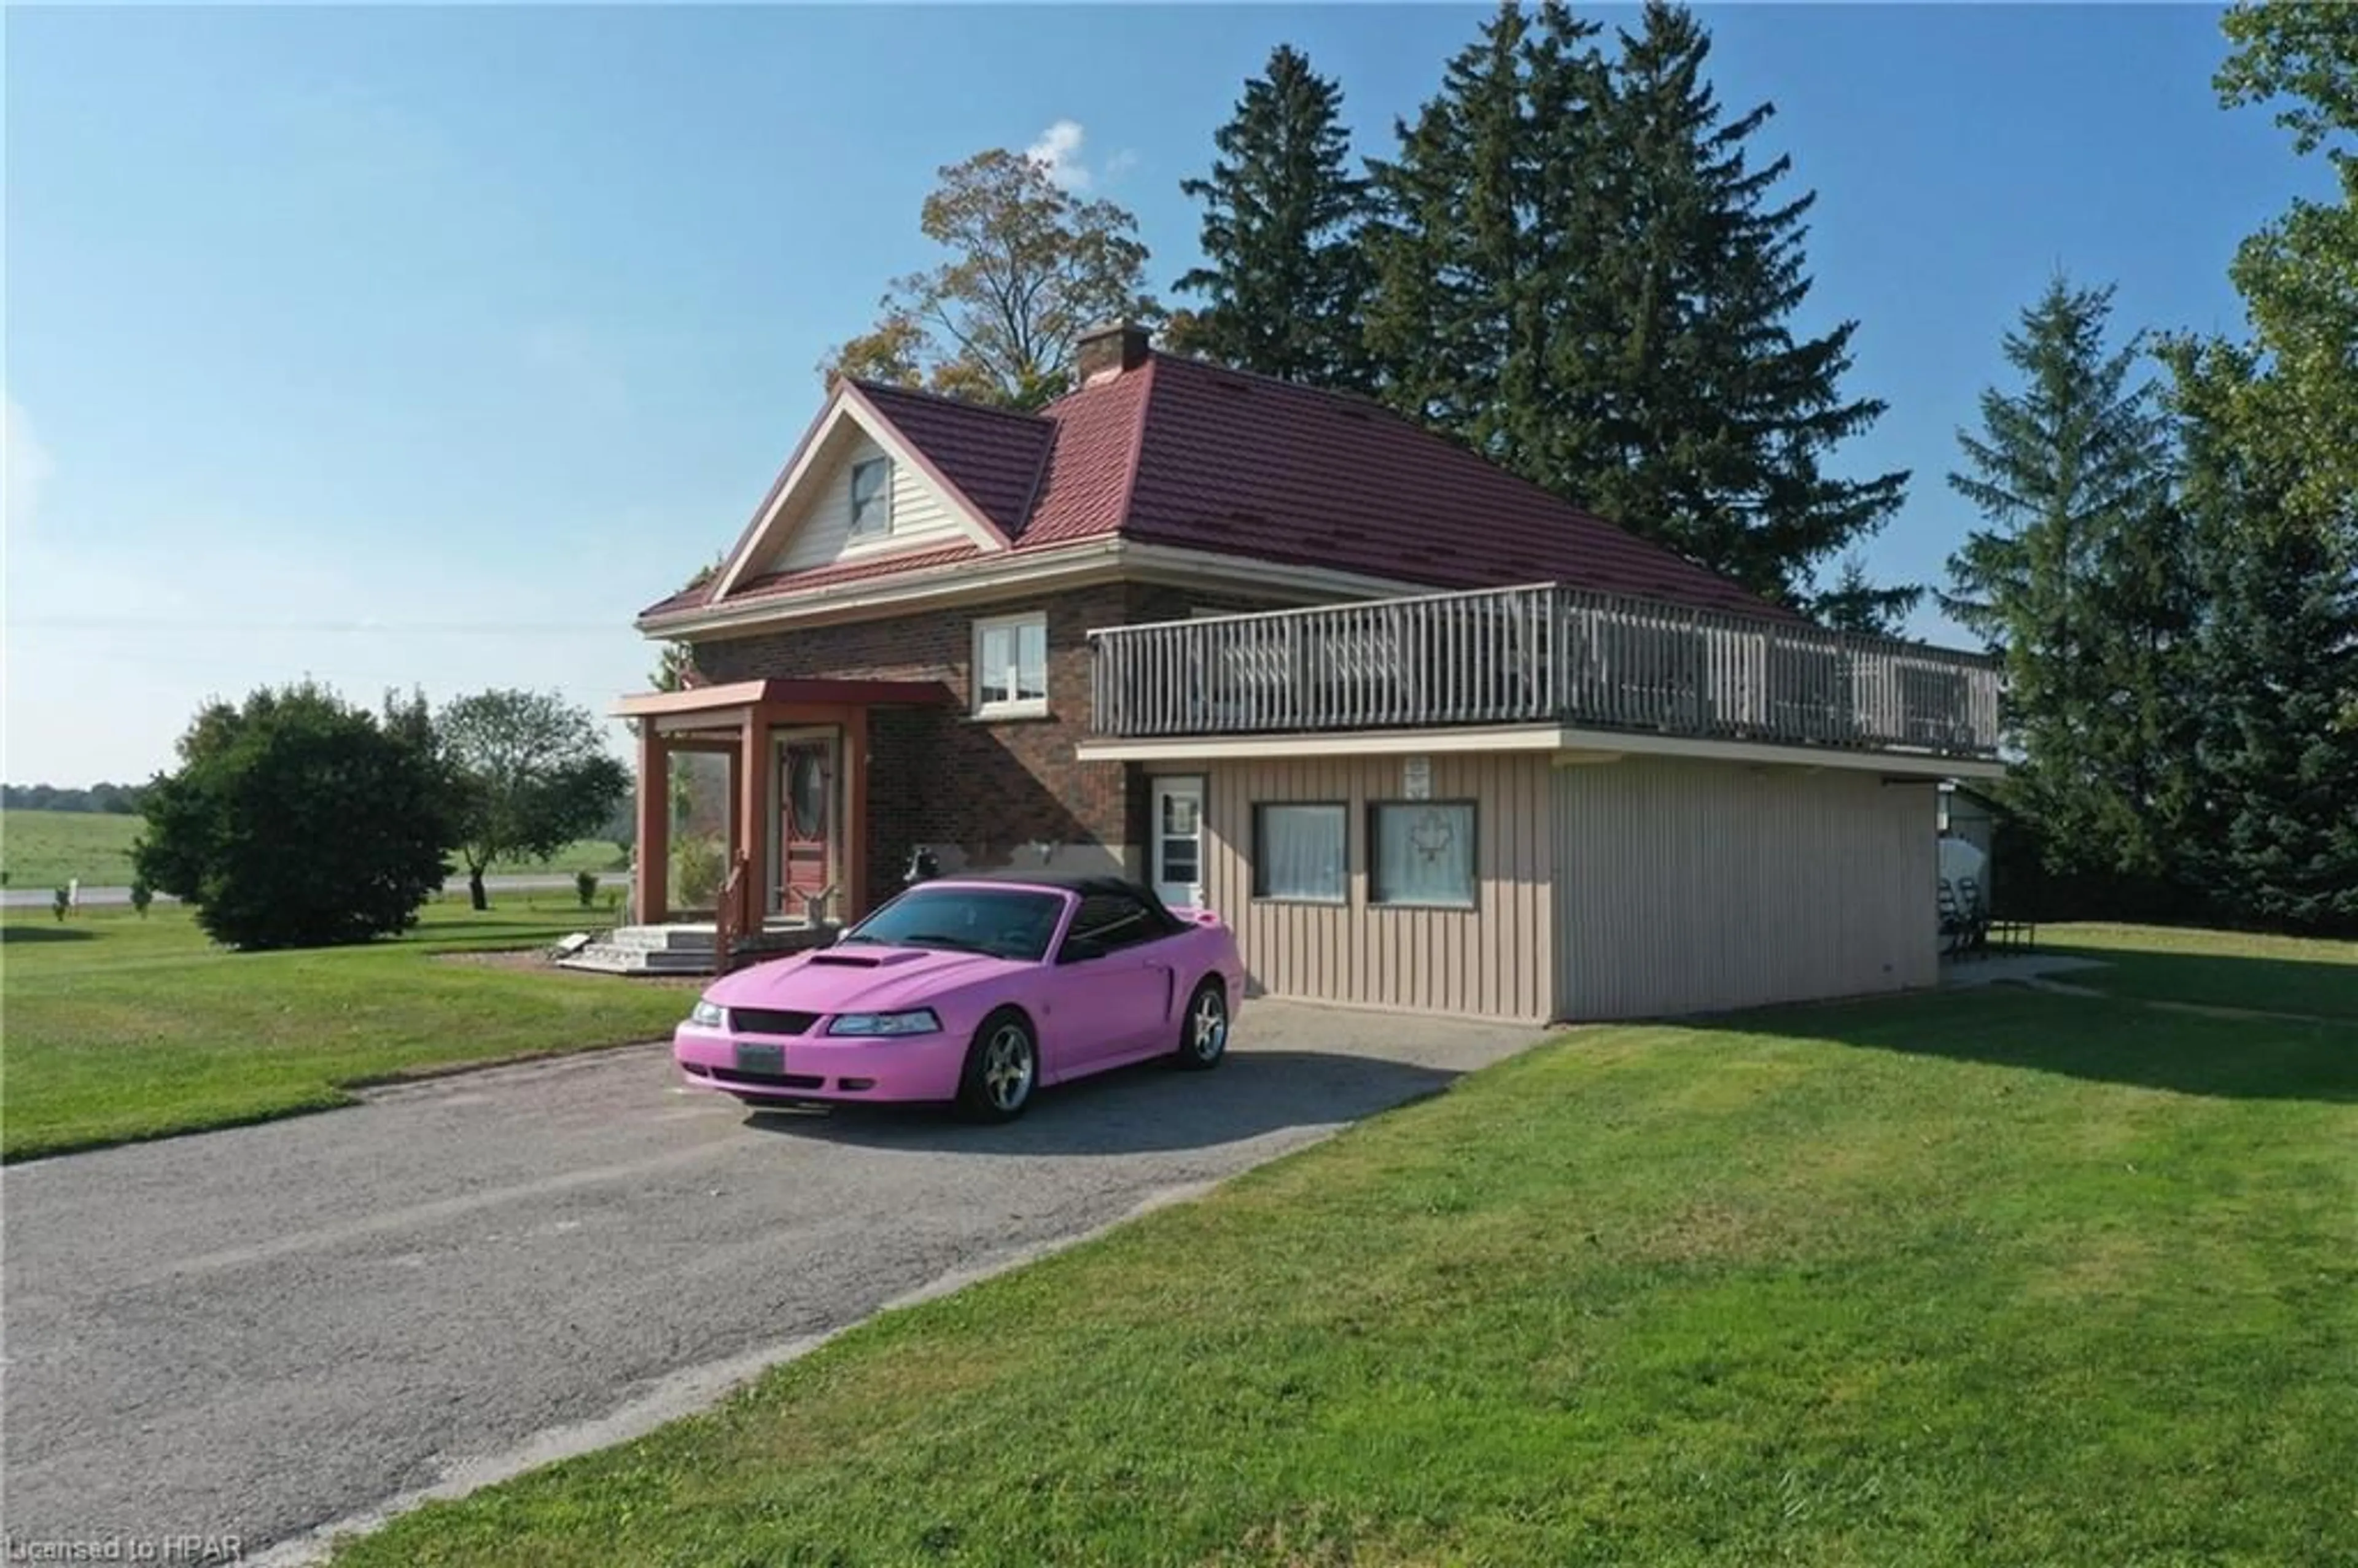 Cottage for 42674 Howick Turnberry Rd, Wroxeter Ontario N0G 2X0